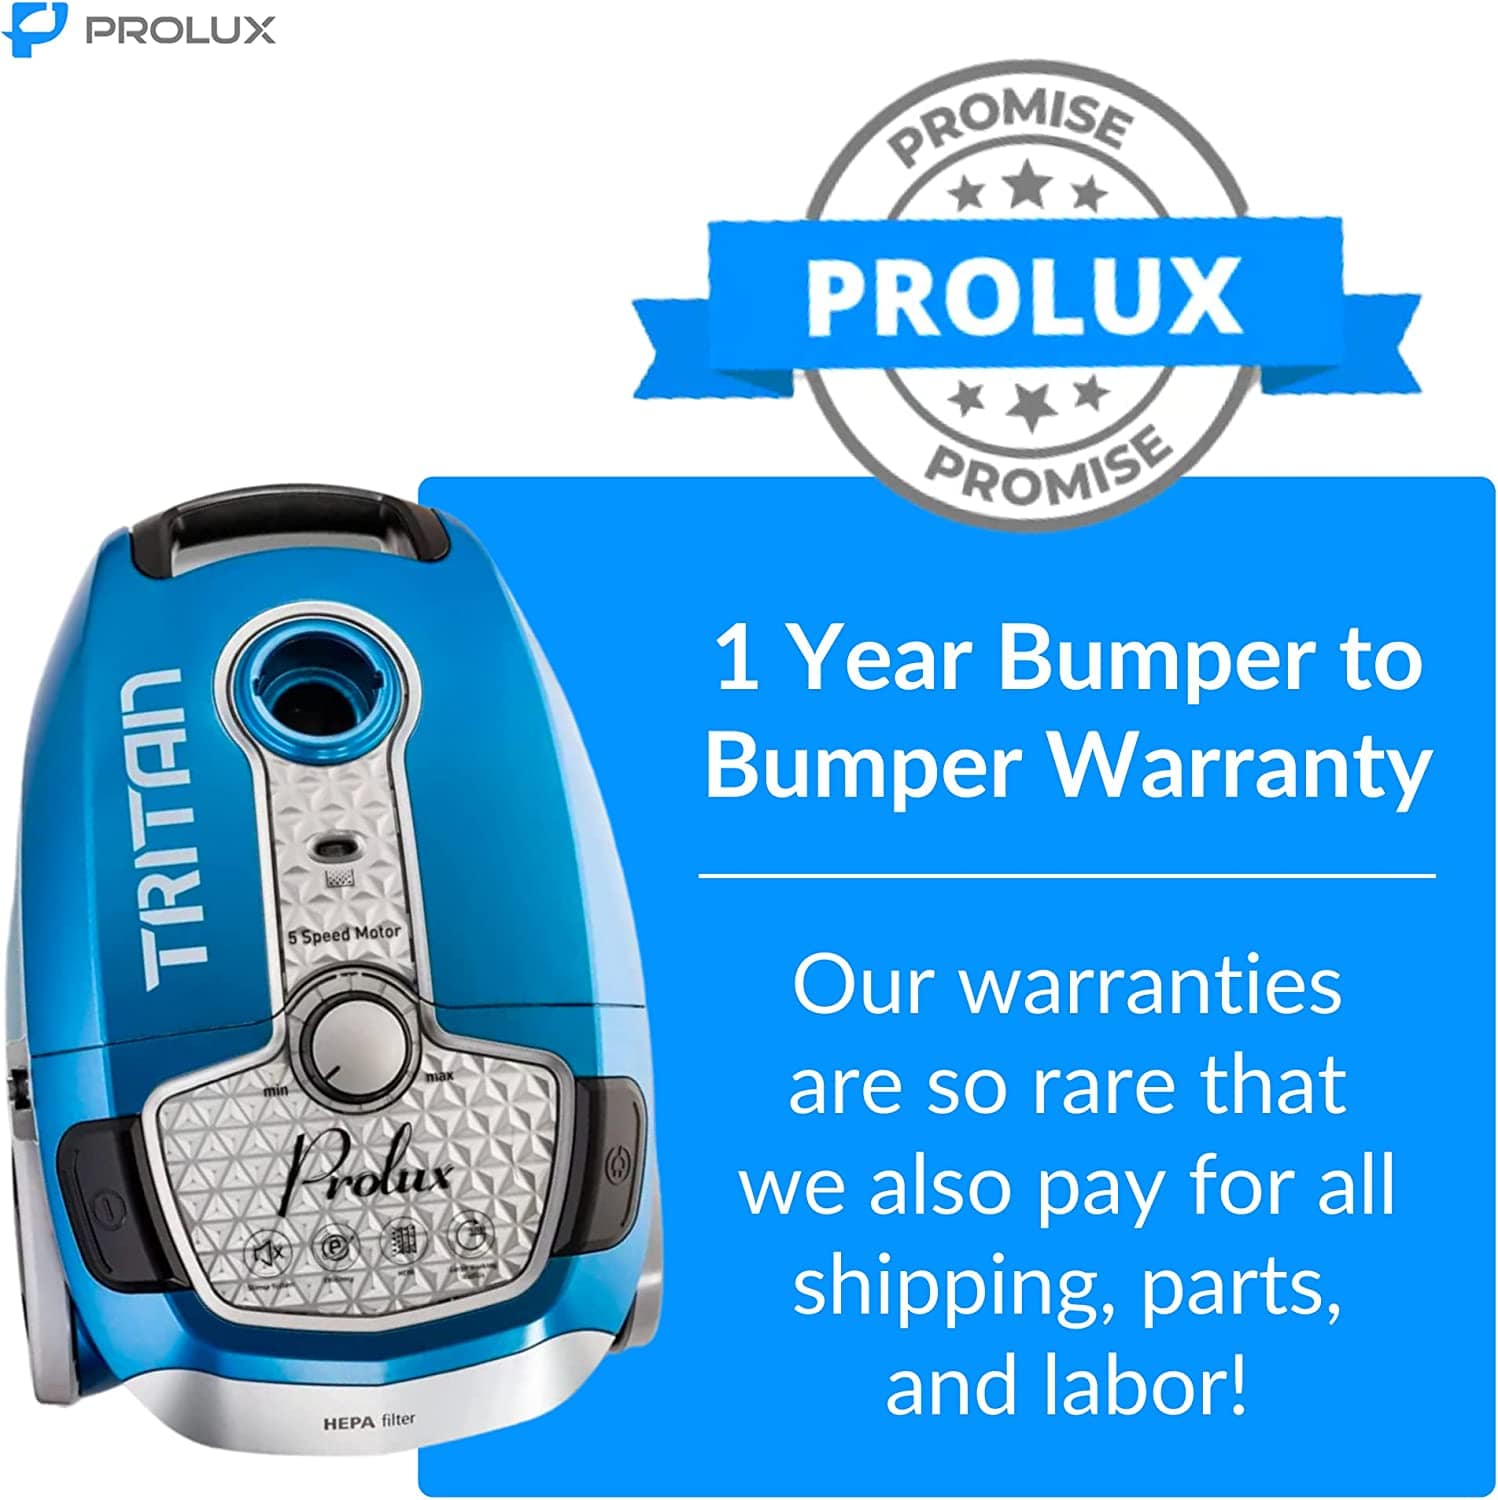 10 Pack of Bags for ProLux Tritan Vacuum Cleaner